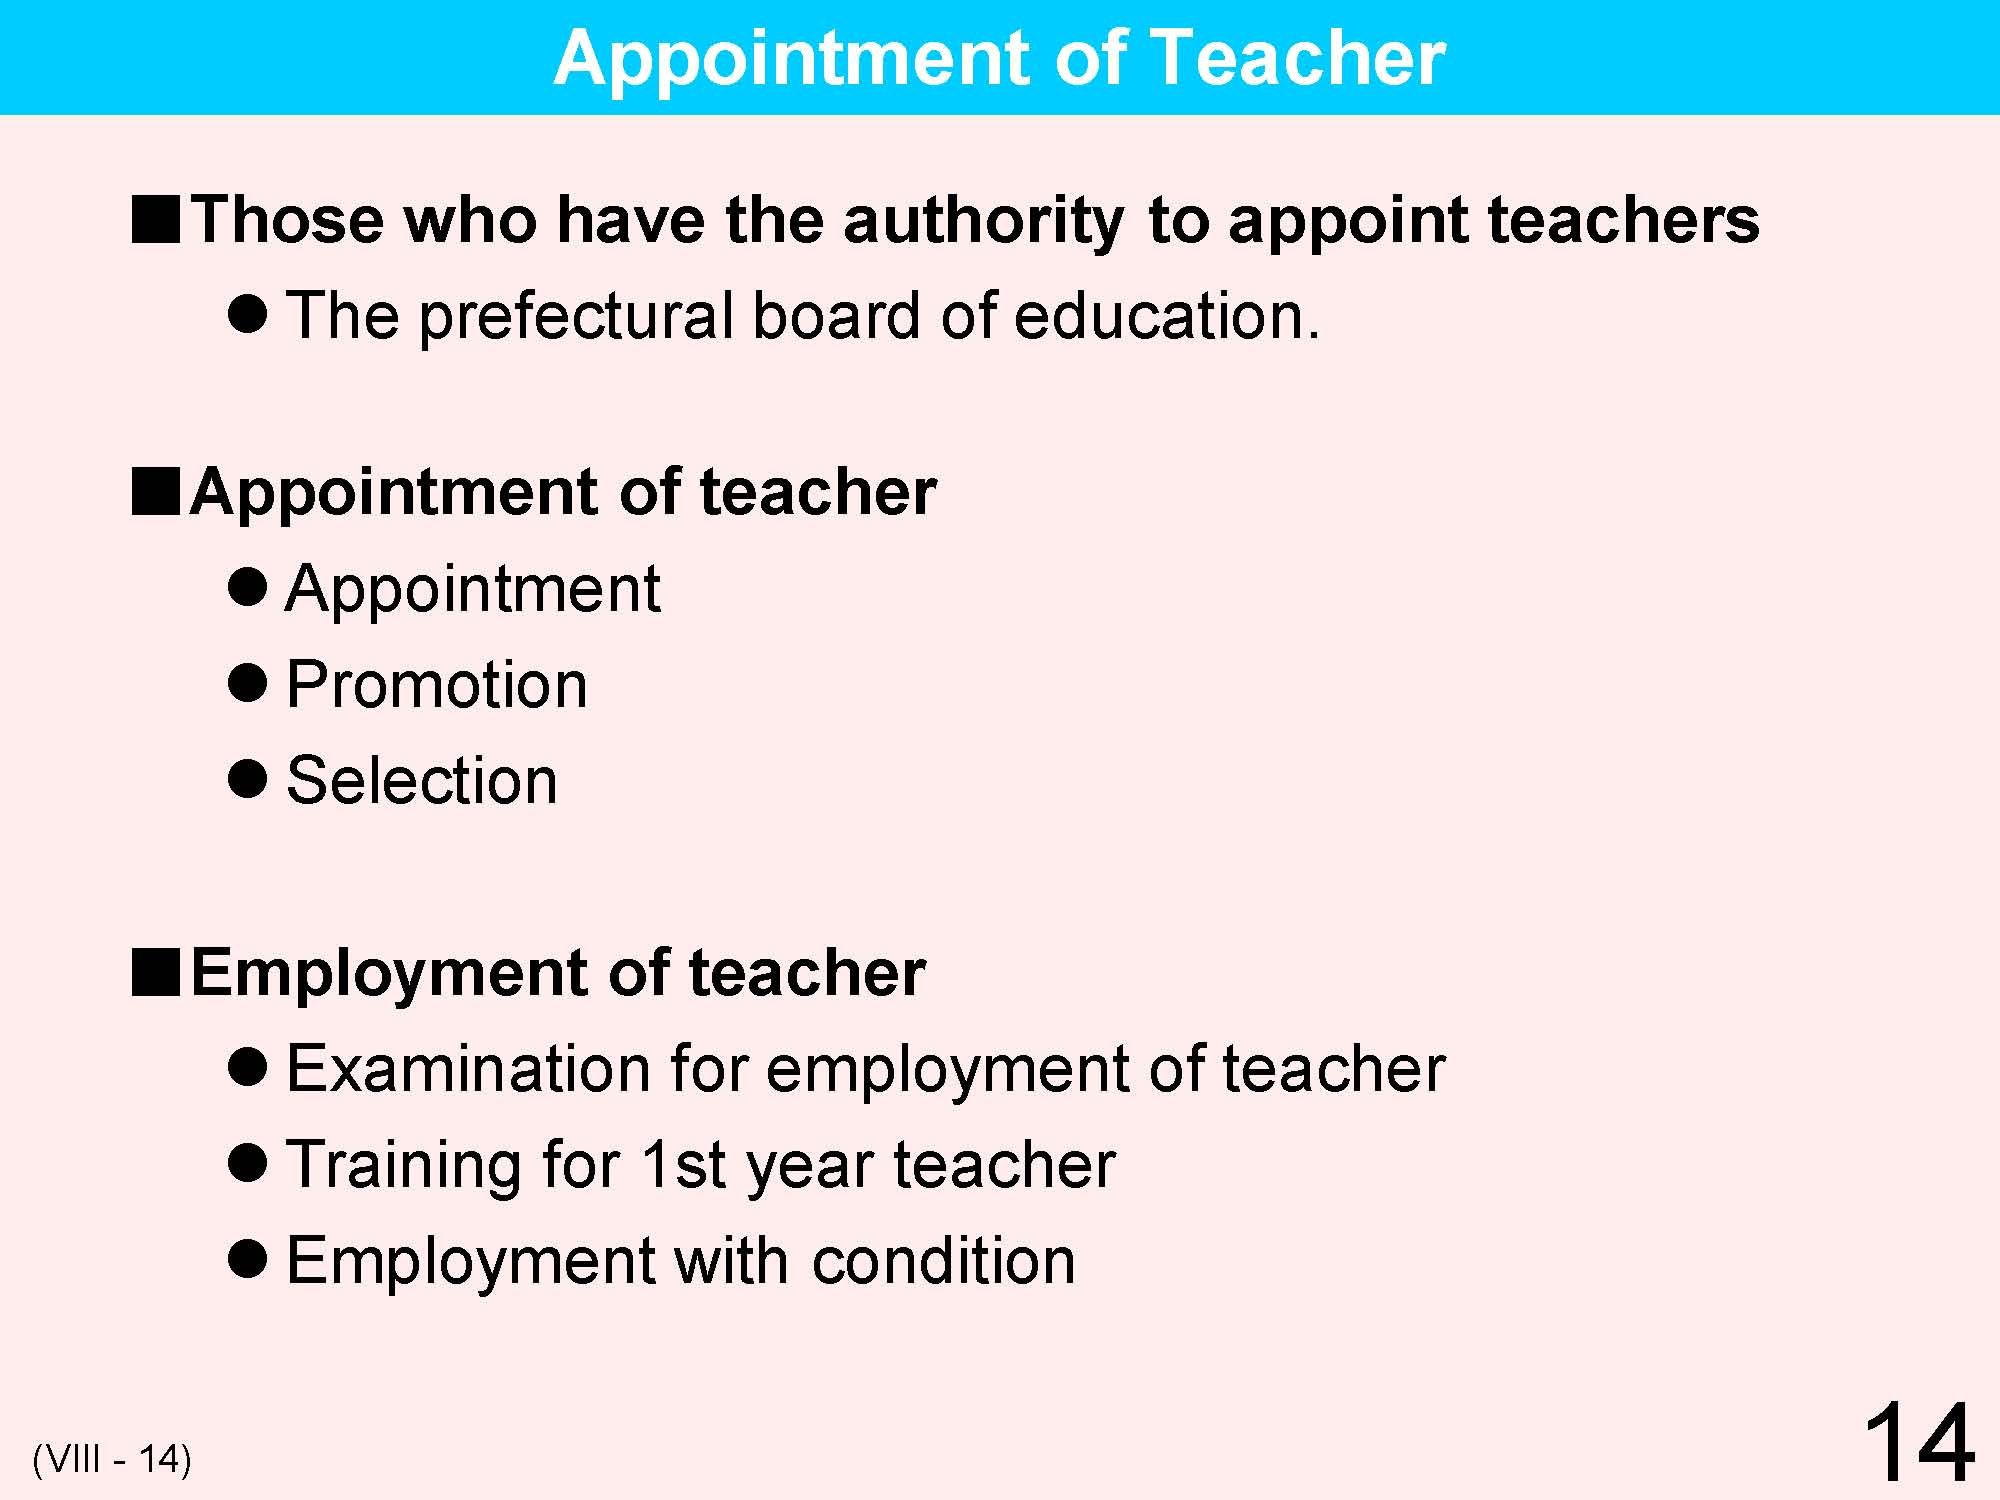 VIII Teacher's Qualifications / Training / Appointment